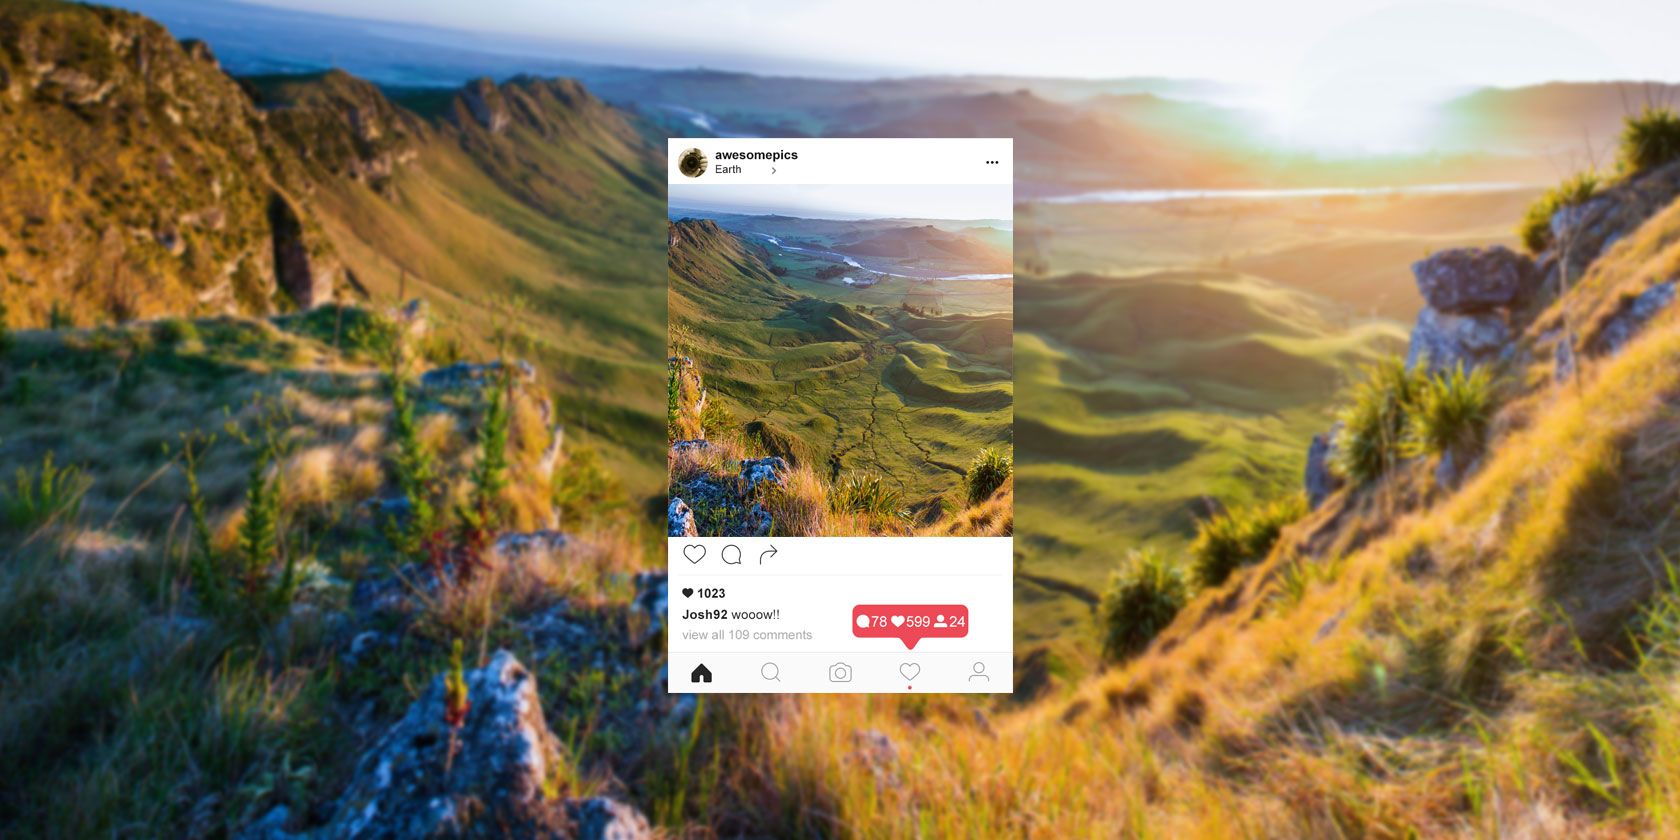 How to Make Your Instagram Profile Perfect